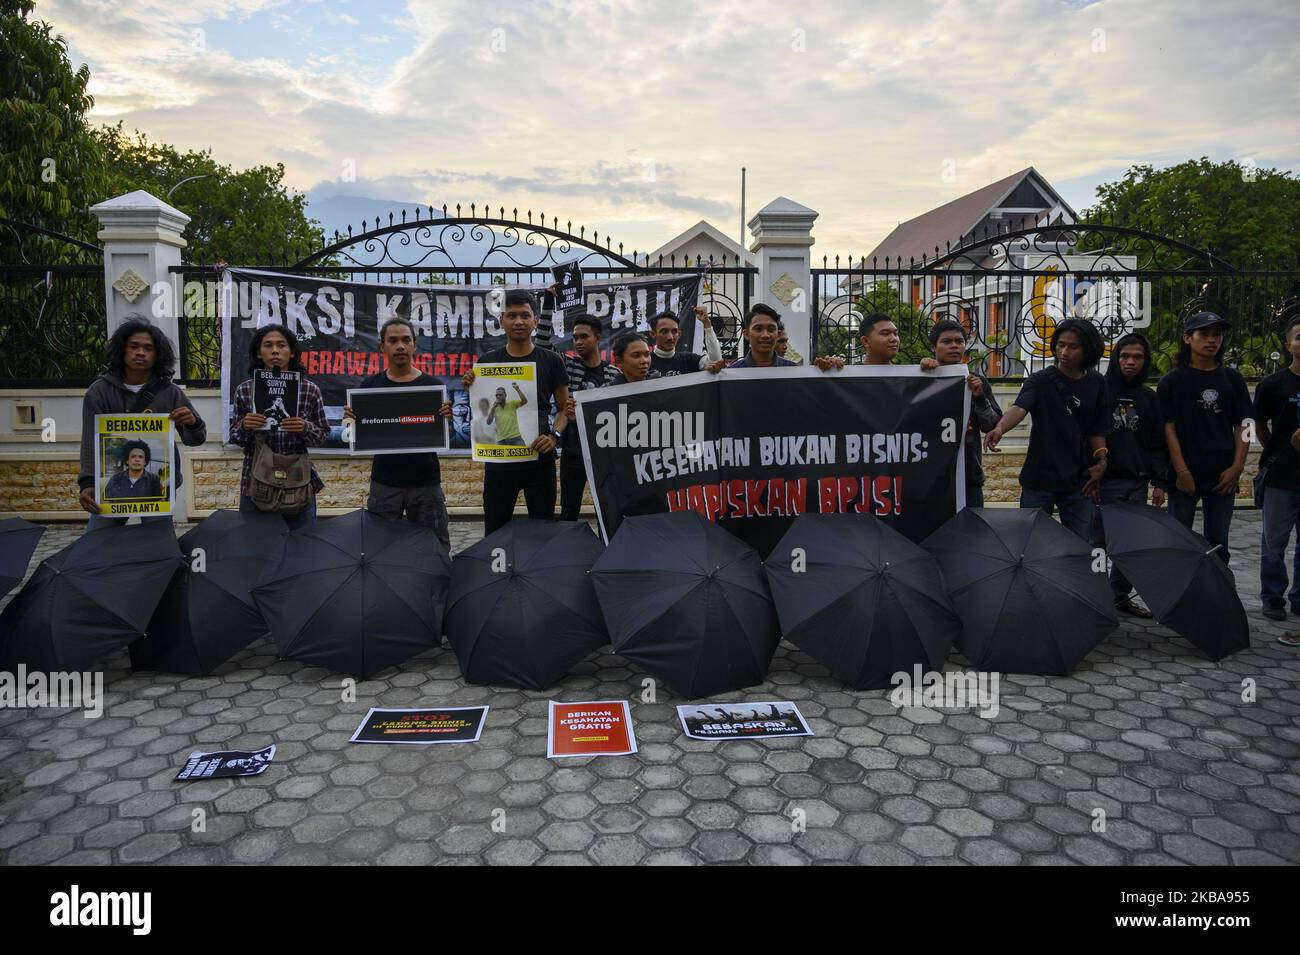 Humanitarian activists carry banners at the Kamisan Action in front of the Central Sulawesi House of Representatives Office in Palu, Central Sulawesi, Indonesia on November 7, 2019. The 16th Kamisan Action this time carries the theme of health and demands to the government so that the state can attend to any public health issues and reject the increase in health insurance contributions managed by the state because they are considered burdening the people. (Photo by Basri Marzuki/NurPhoto) Stock Photo